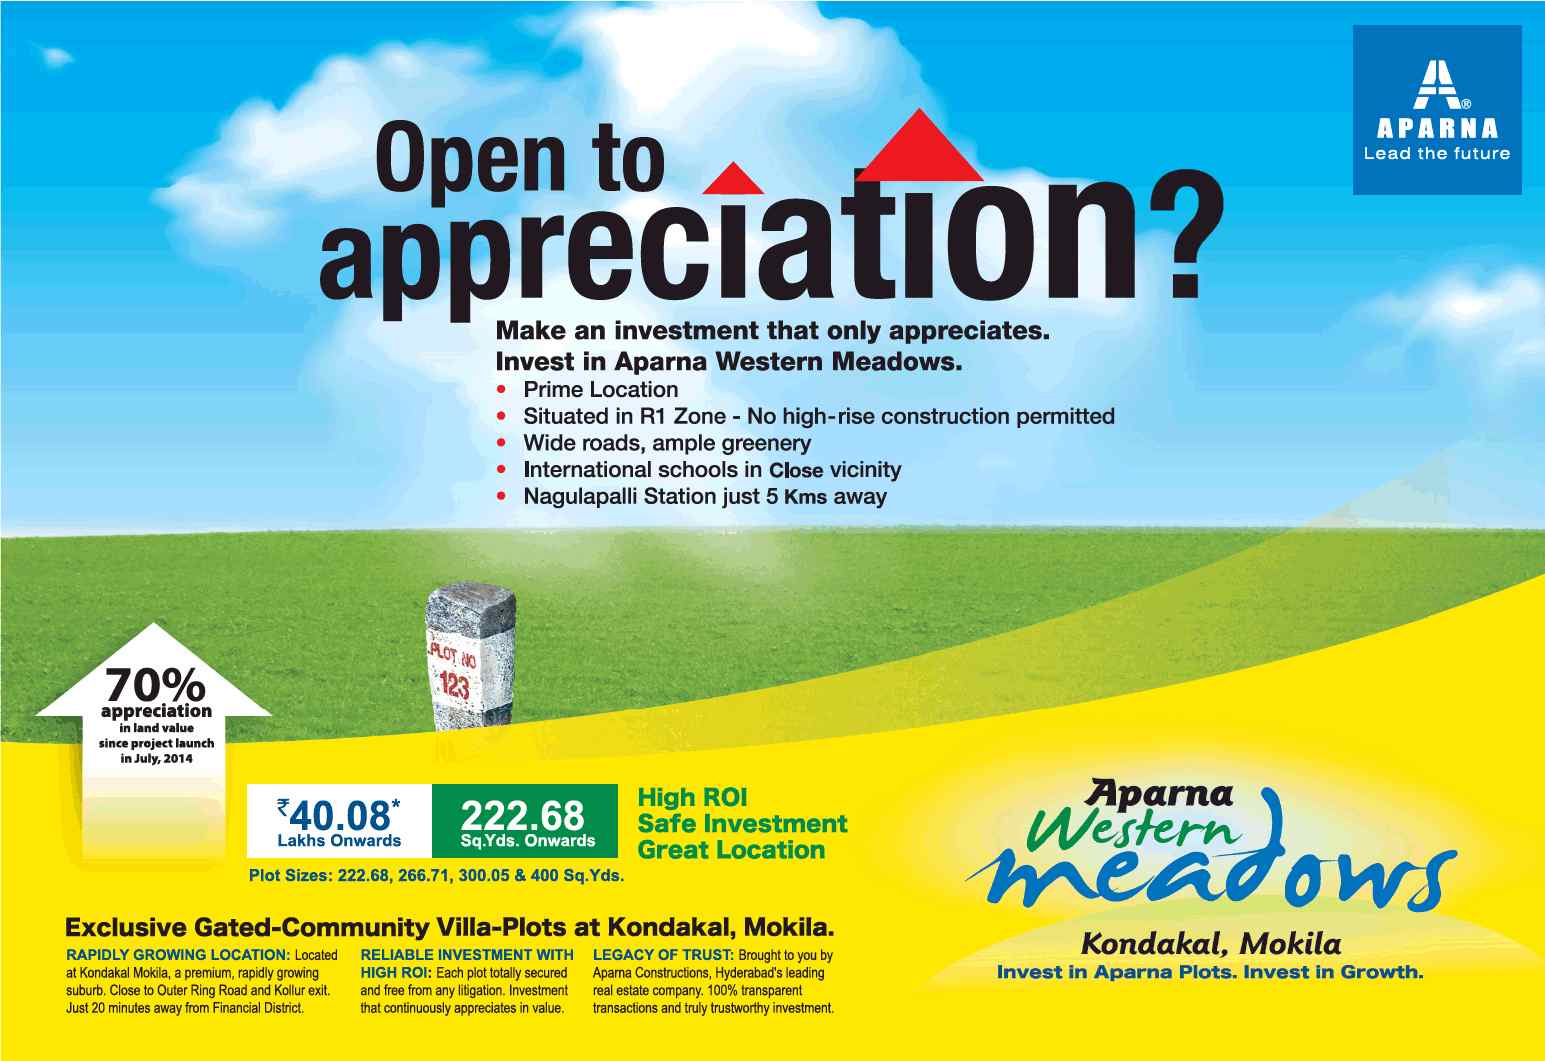 High ROI with safe investment and great location at Aparna Western Meadows in Hyderabad Update